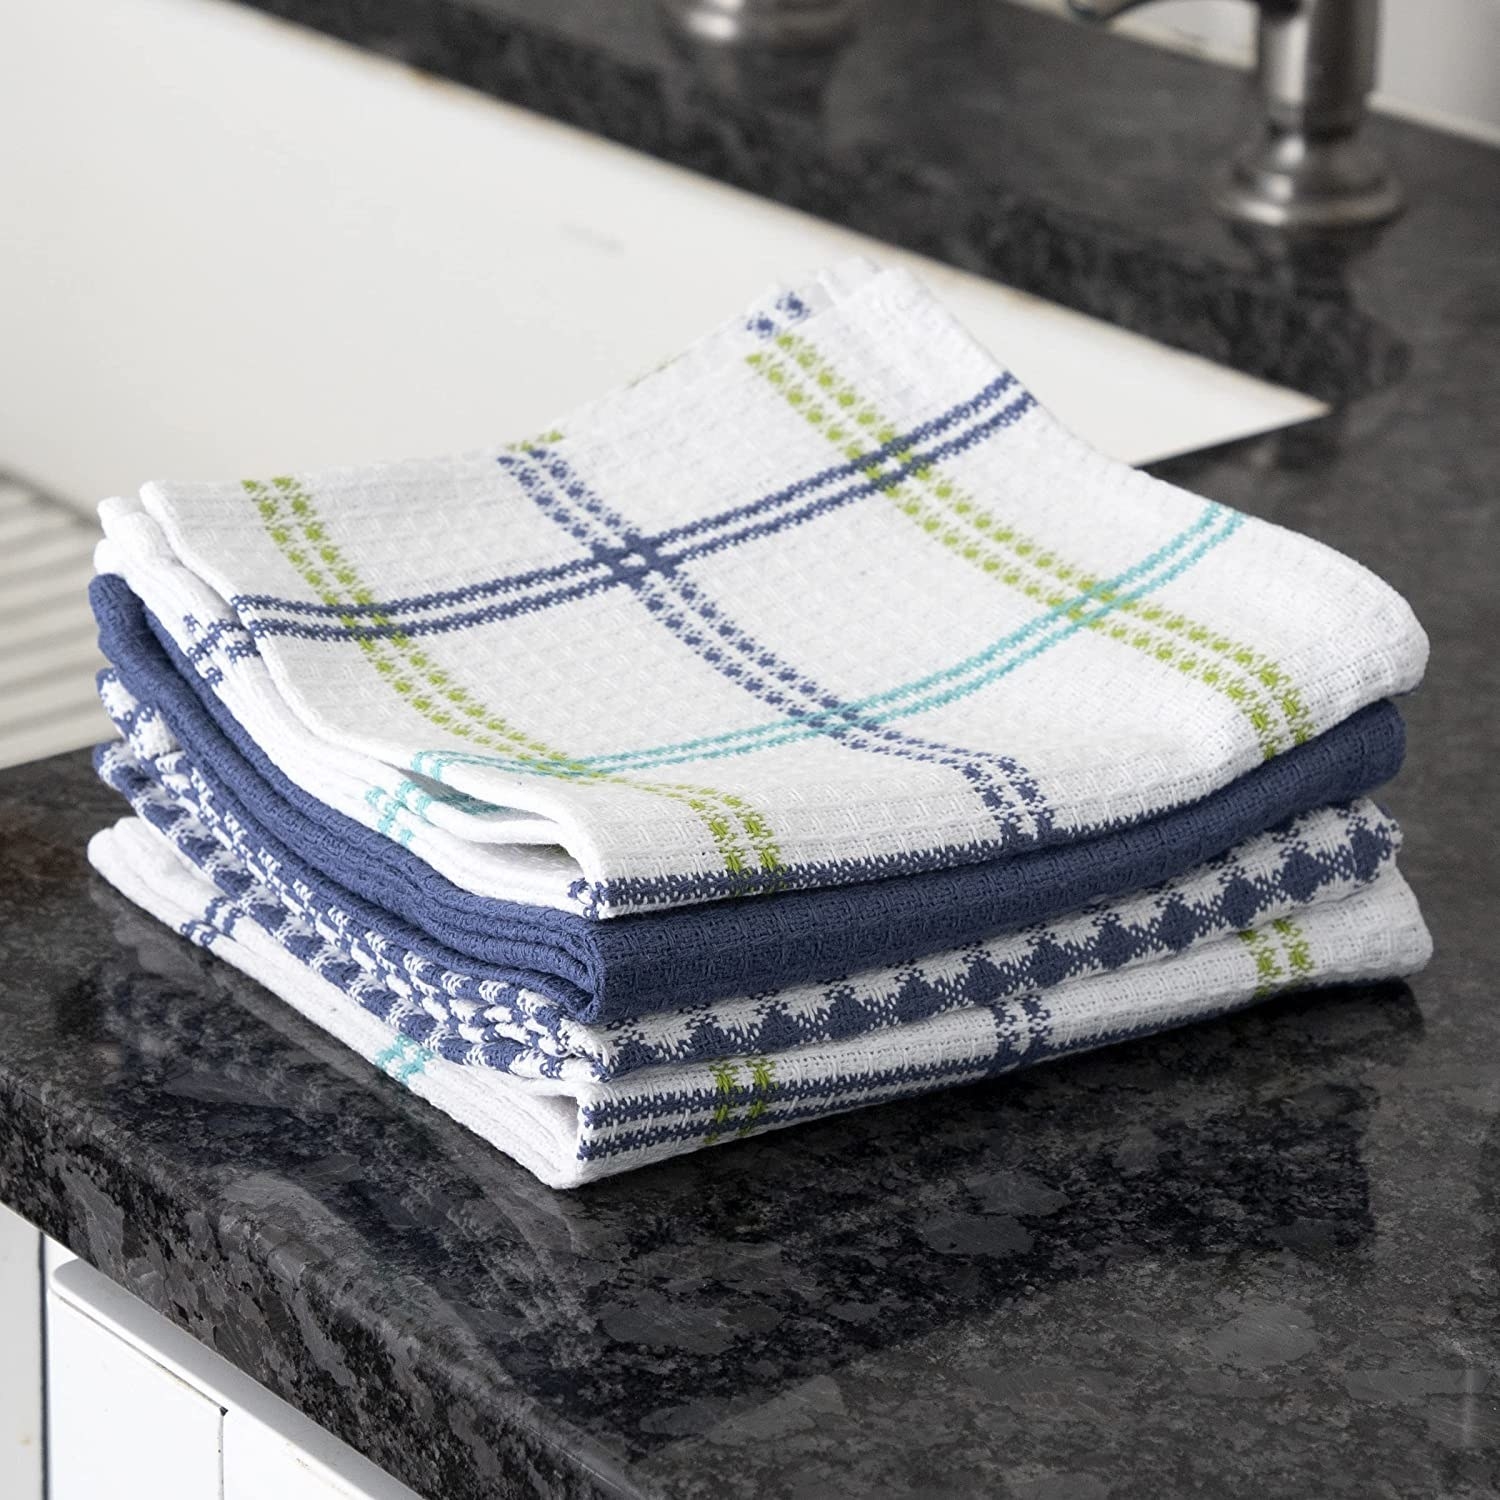 stack of plaid dishcloths on a kitchen counter